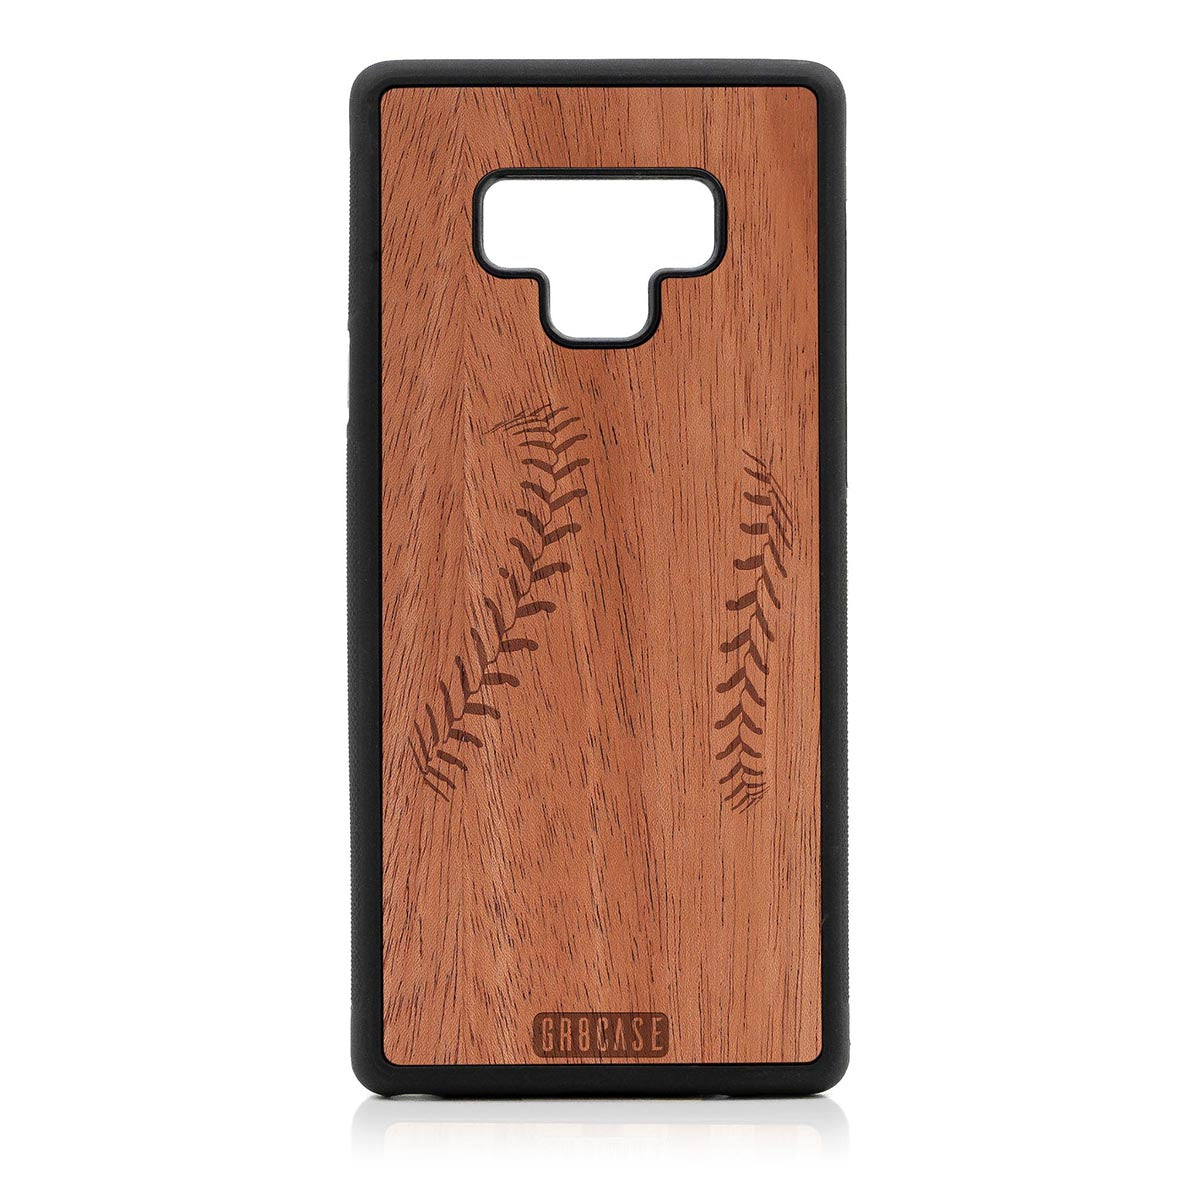 Baseball Stitches Design Wood Case For Samsung Galaxy Note 9 by GR8CASE